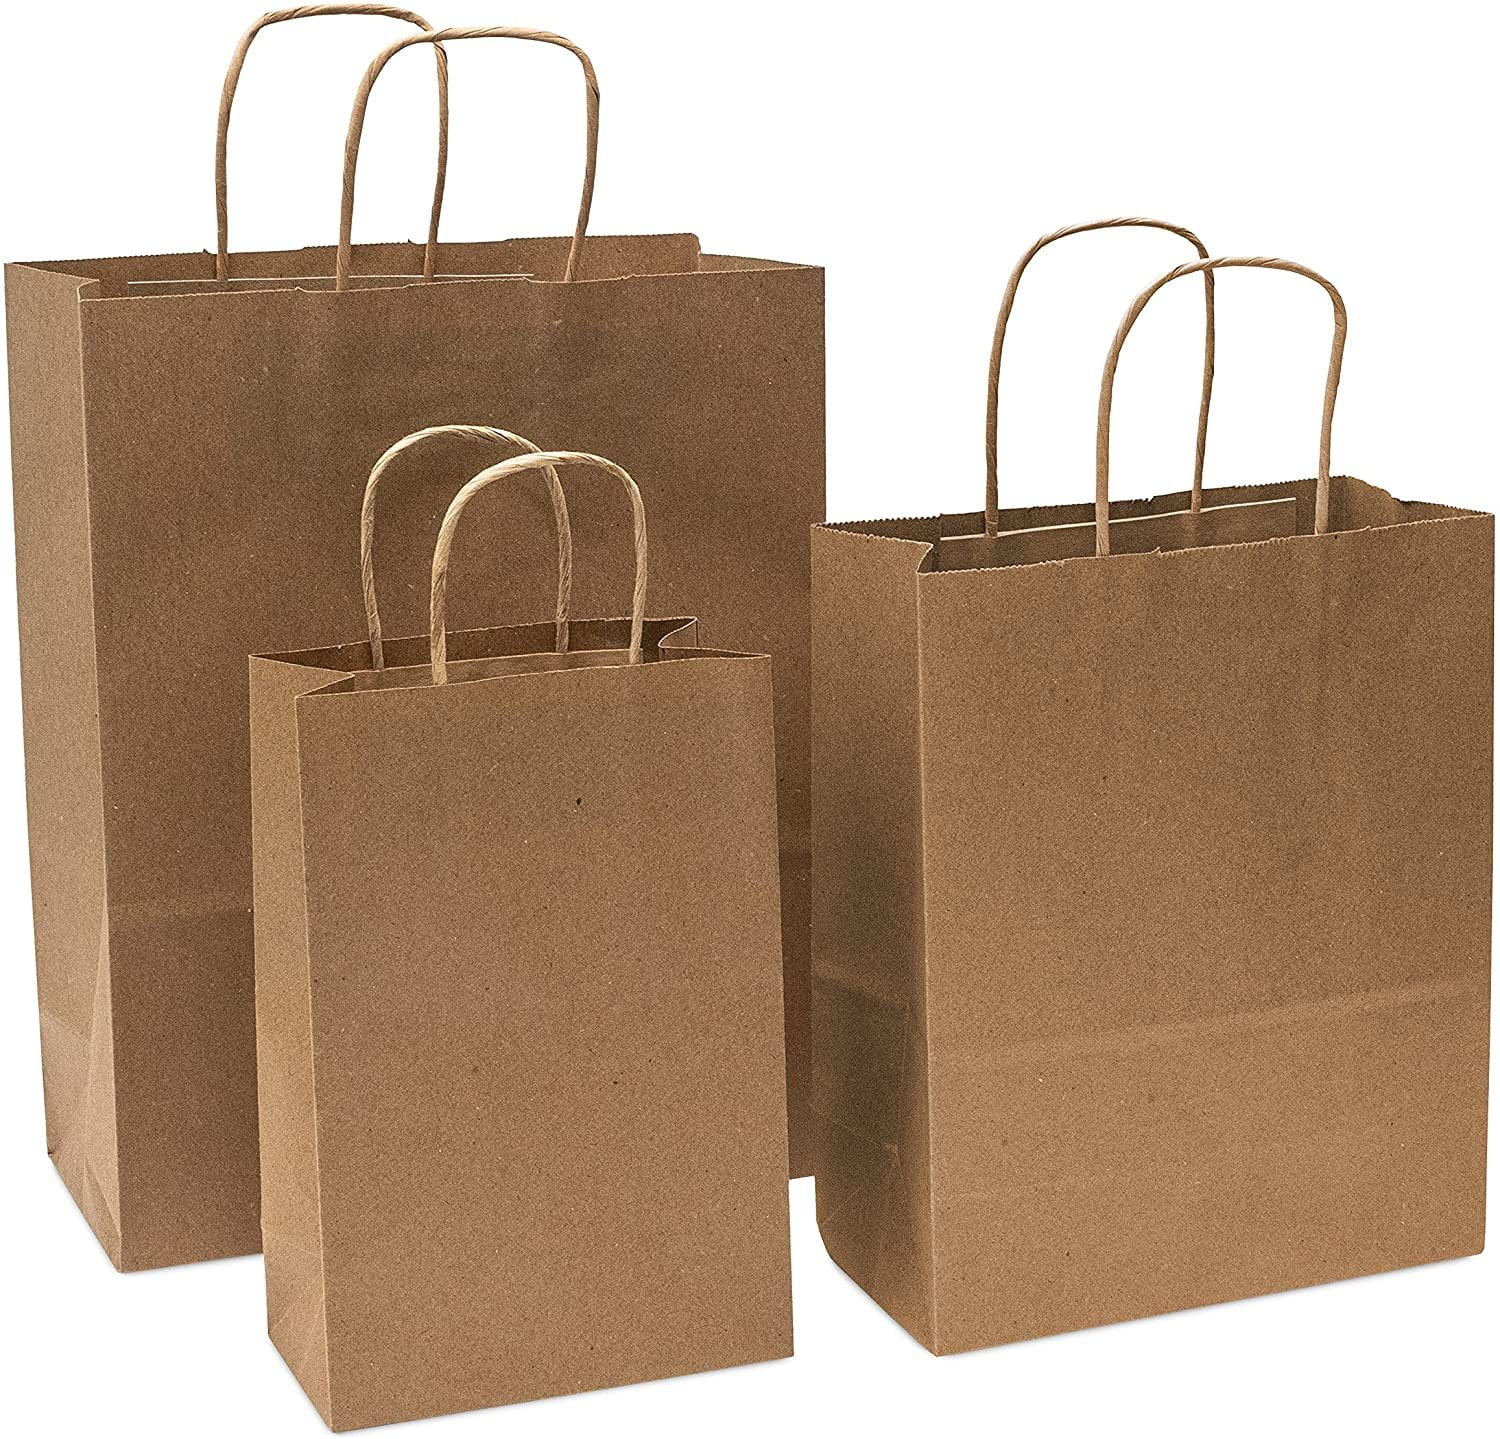 Restaurants Small Brown Paper Bags with Handles Gifts 6x3x9 Inch 50 Pack Kraft Shopping Bags Take Out Small Business Craft Totes for Boutiques Birthday Parties Merchandise Bulk Retail Stores 